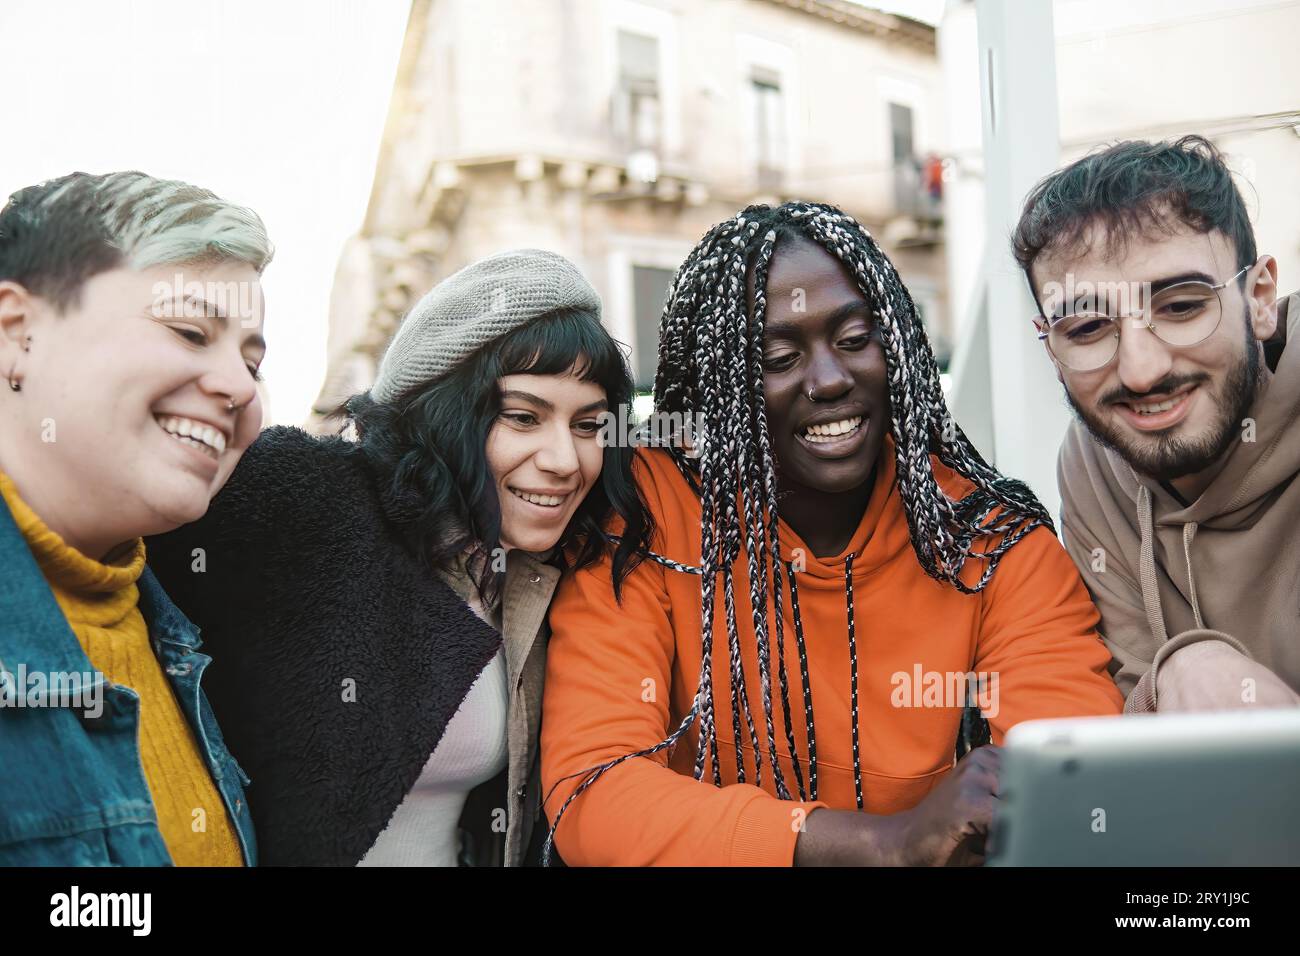 A diverse group of young adults, including a non-binary individual with colorful hair and nose piercings, gathers outdoors, laughing and engaging with Stock Photo